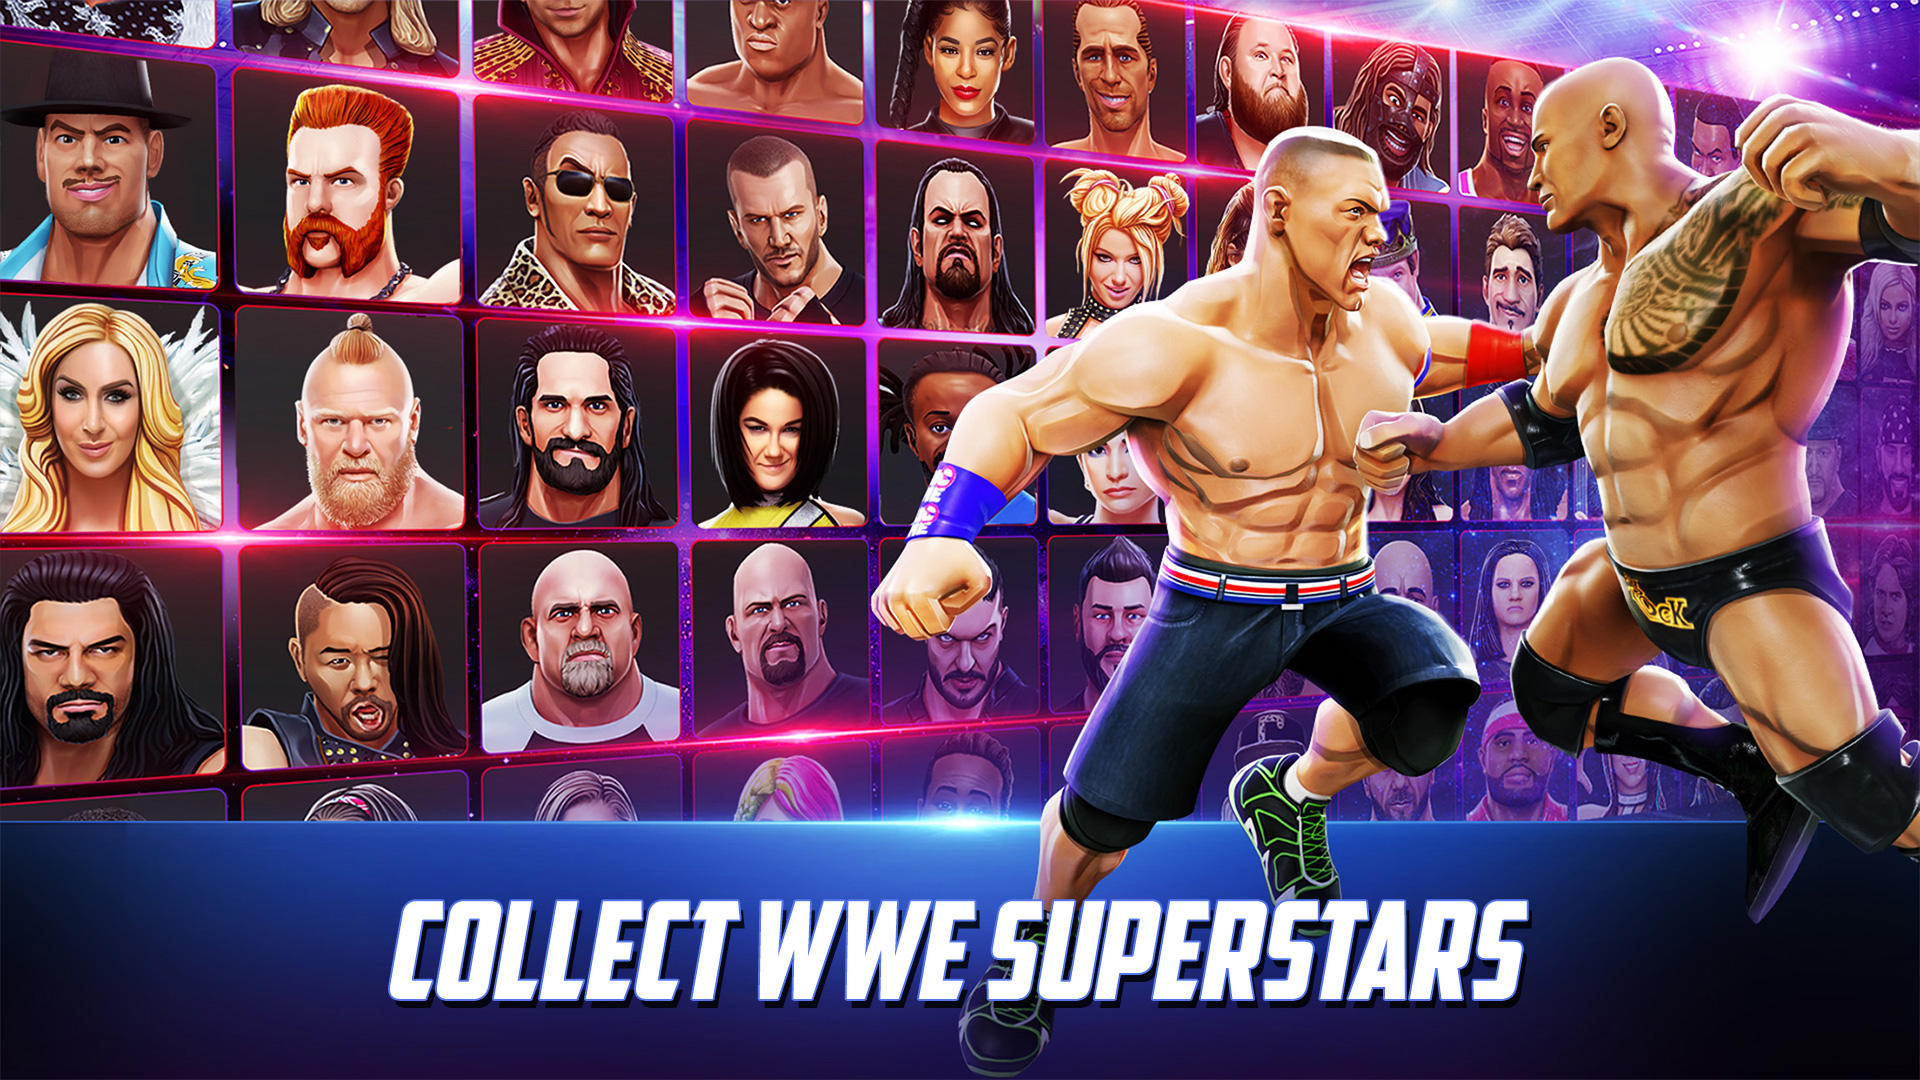 wwe 2k22 game for mobile, video recording, WrestleMania